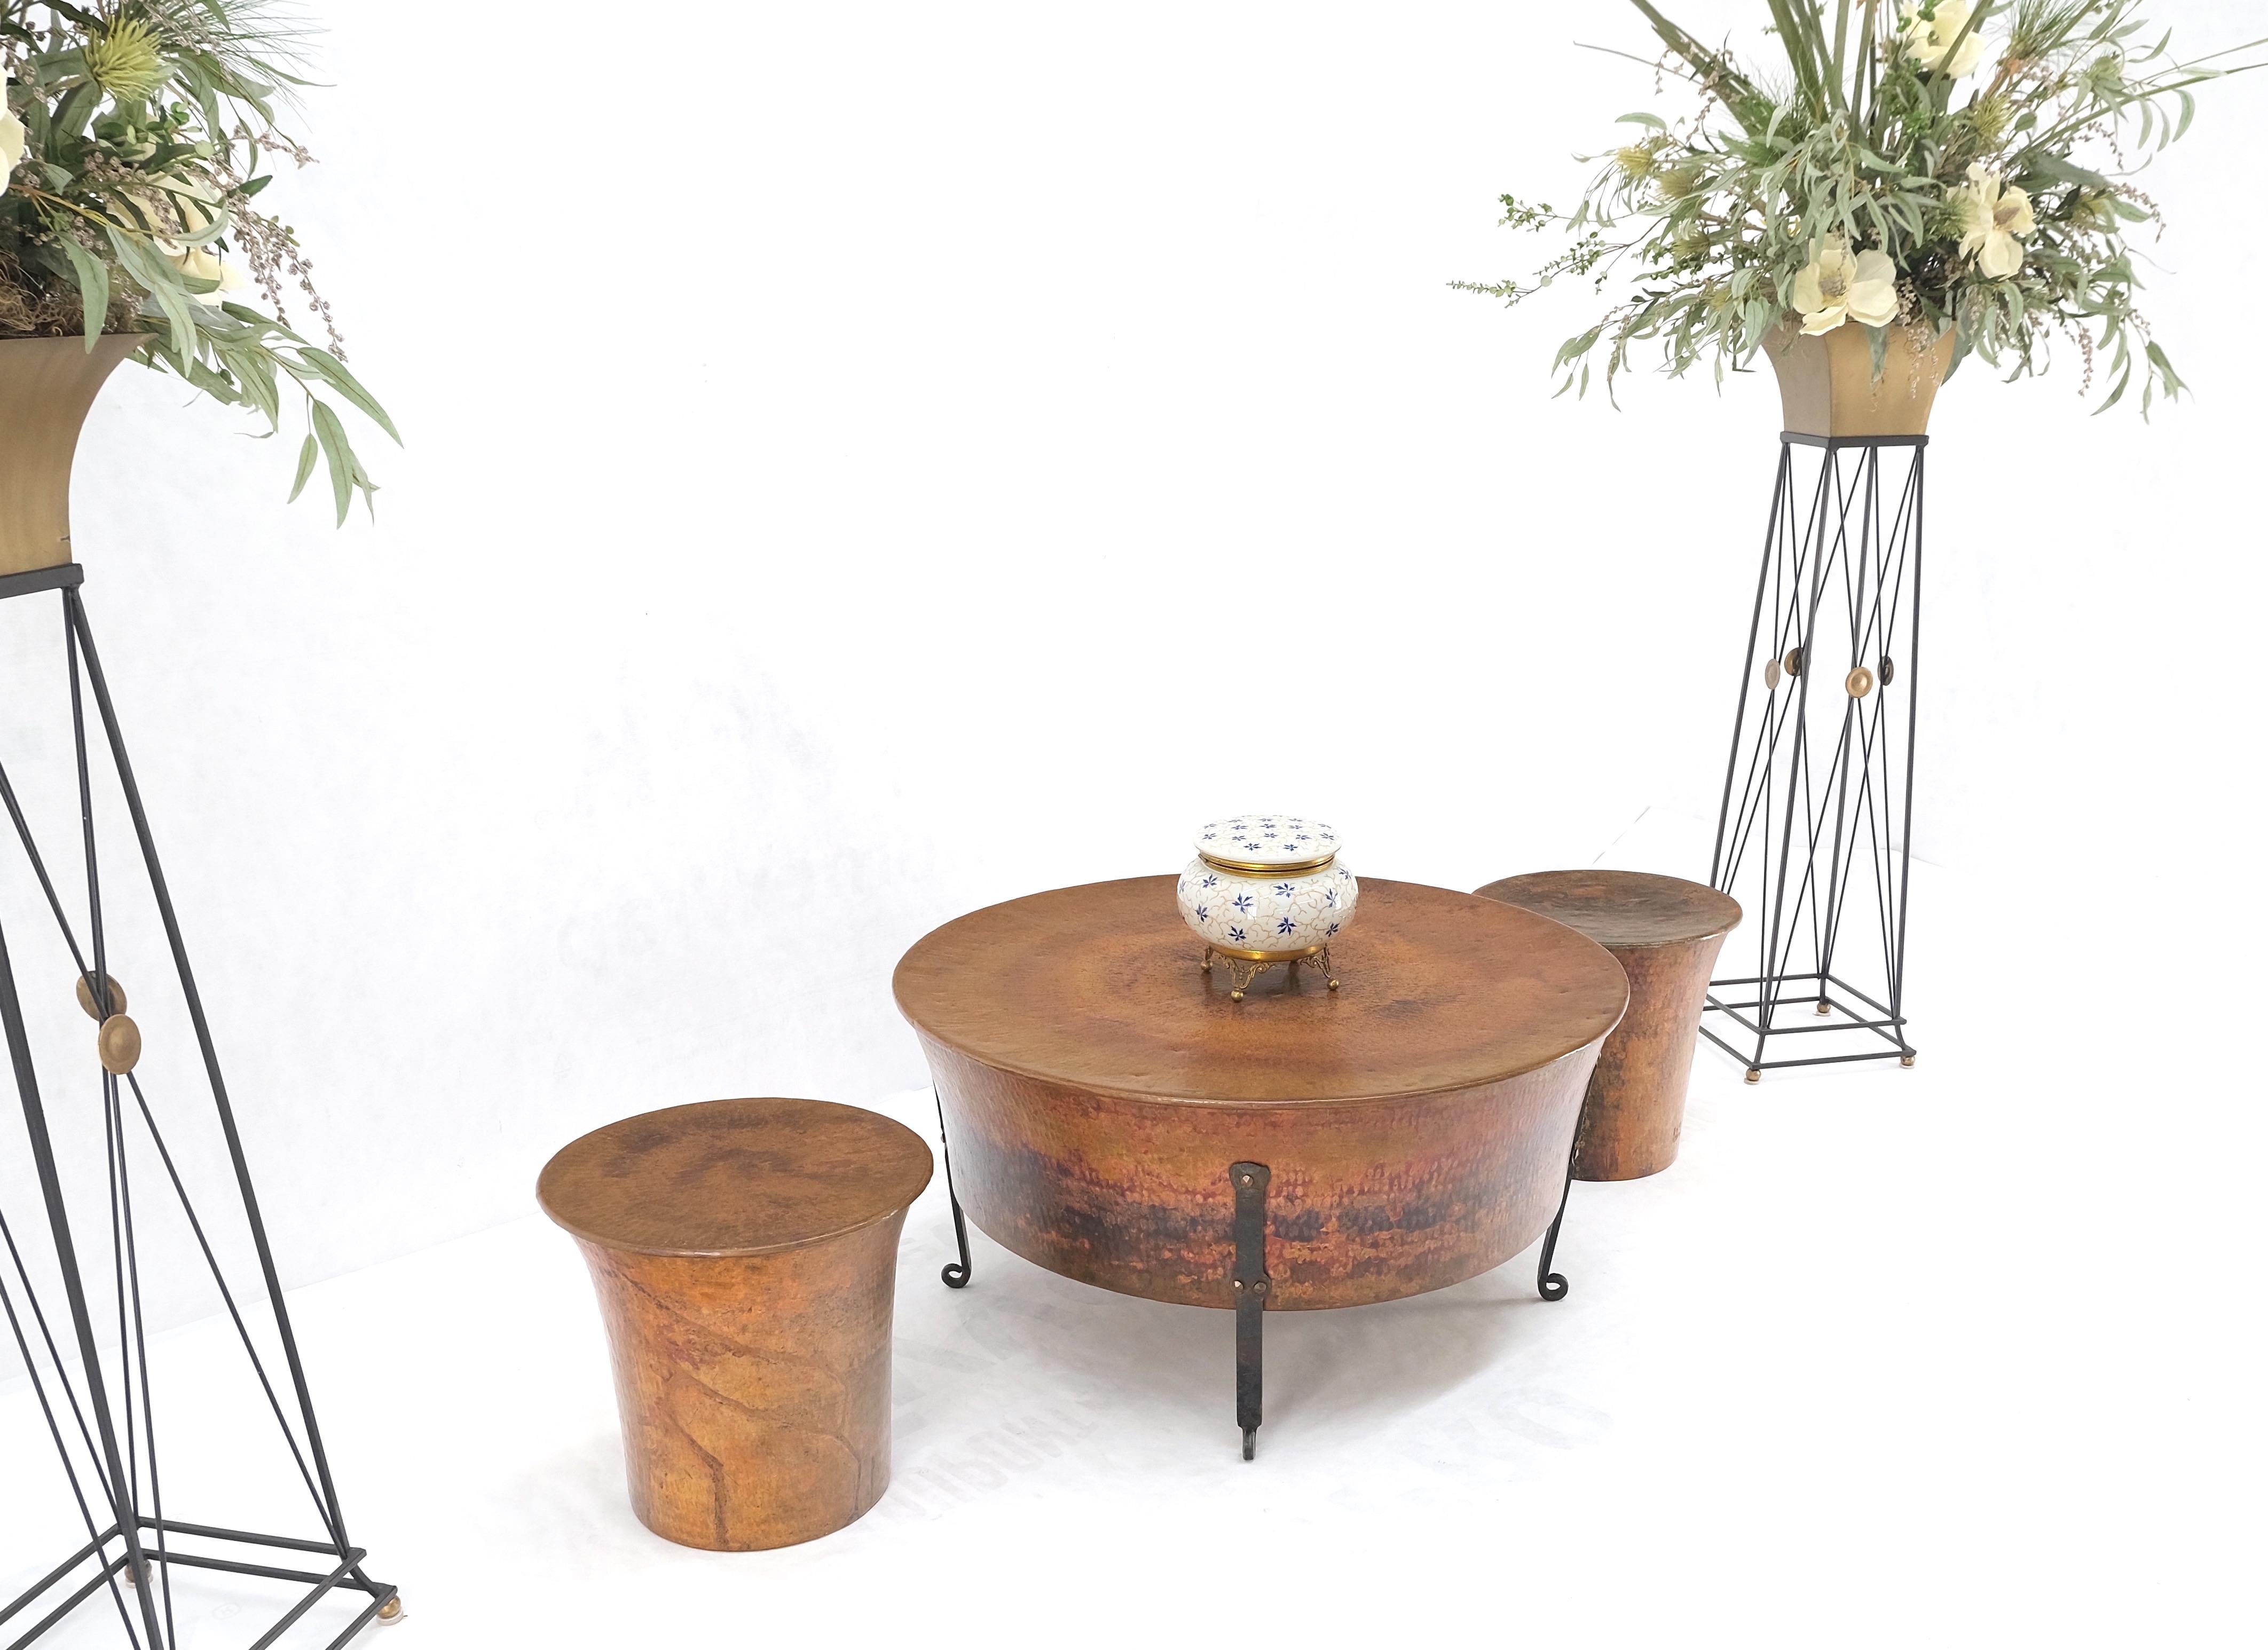 20th Century Vintage Hummered Forged Copper & Iron Round Coffee Table & Pair of Stools Seats For Sale